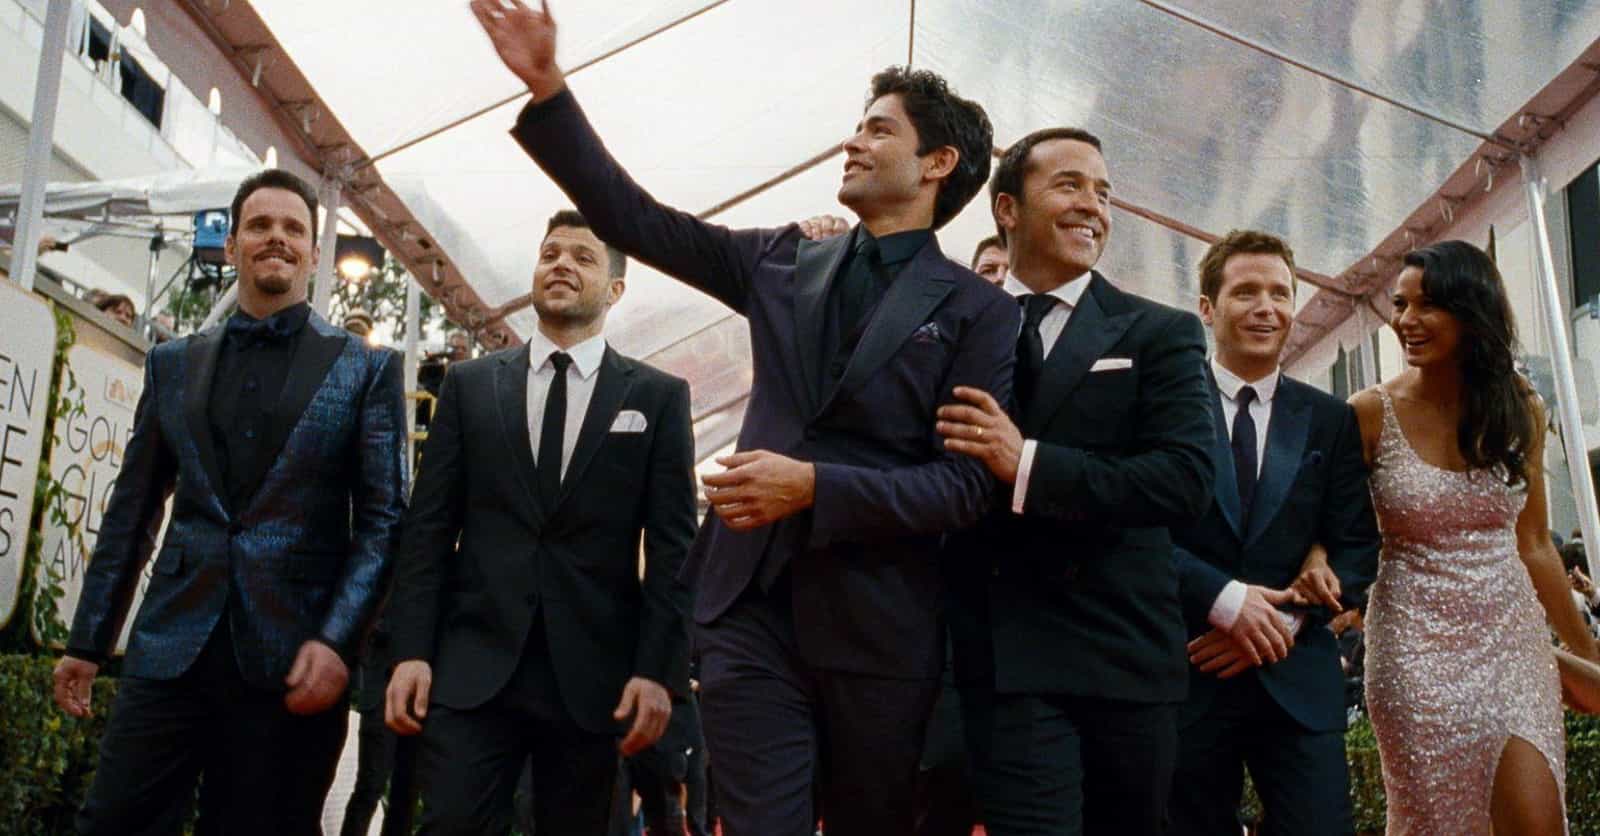 Entourage Cast: Where Are They Now?